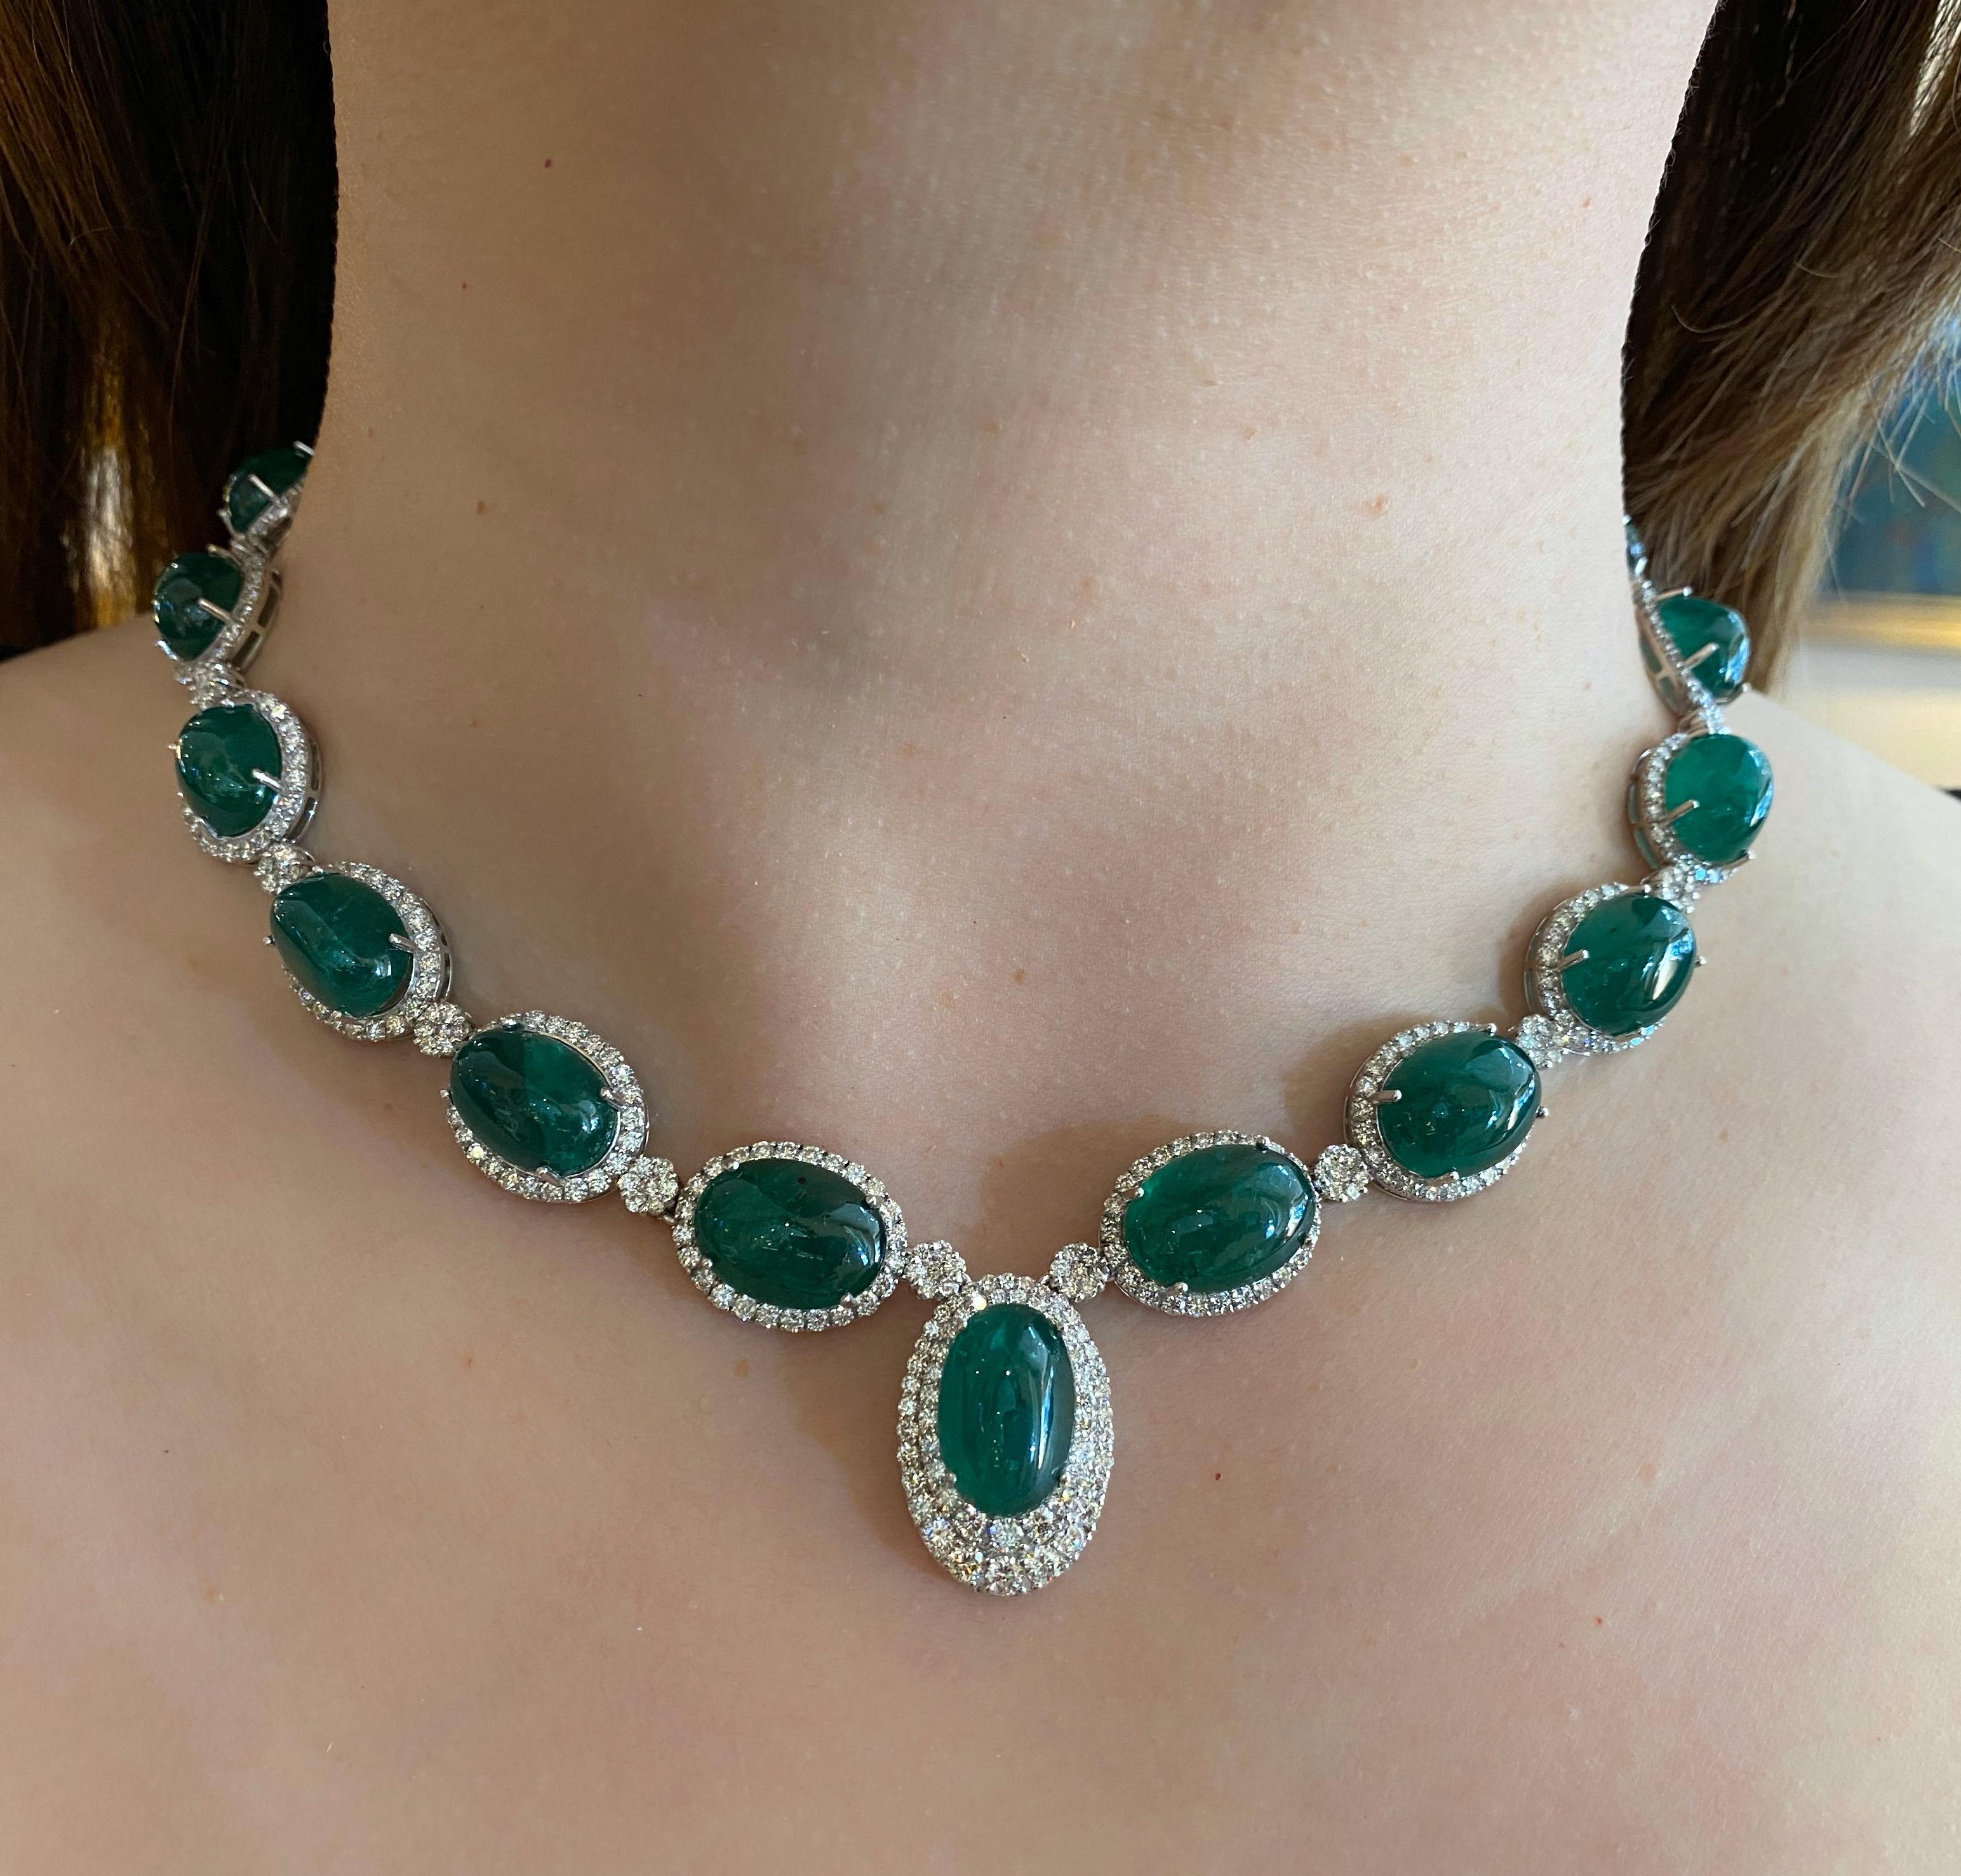 Emerald and Diamond Necklace in 18k White Gold
features
15 Oval Cabochon Emeralds
graduating in size
totaling 87.32 carats
Deep Green color

surrounded by
Round Brilliant Cut Diamonds
with Diamond florets in between
and composing the necklace in the